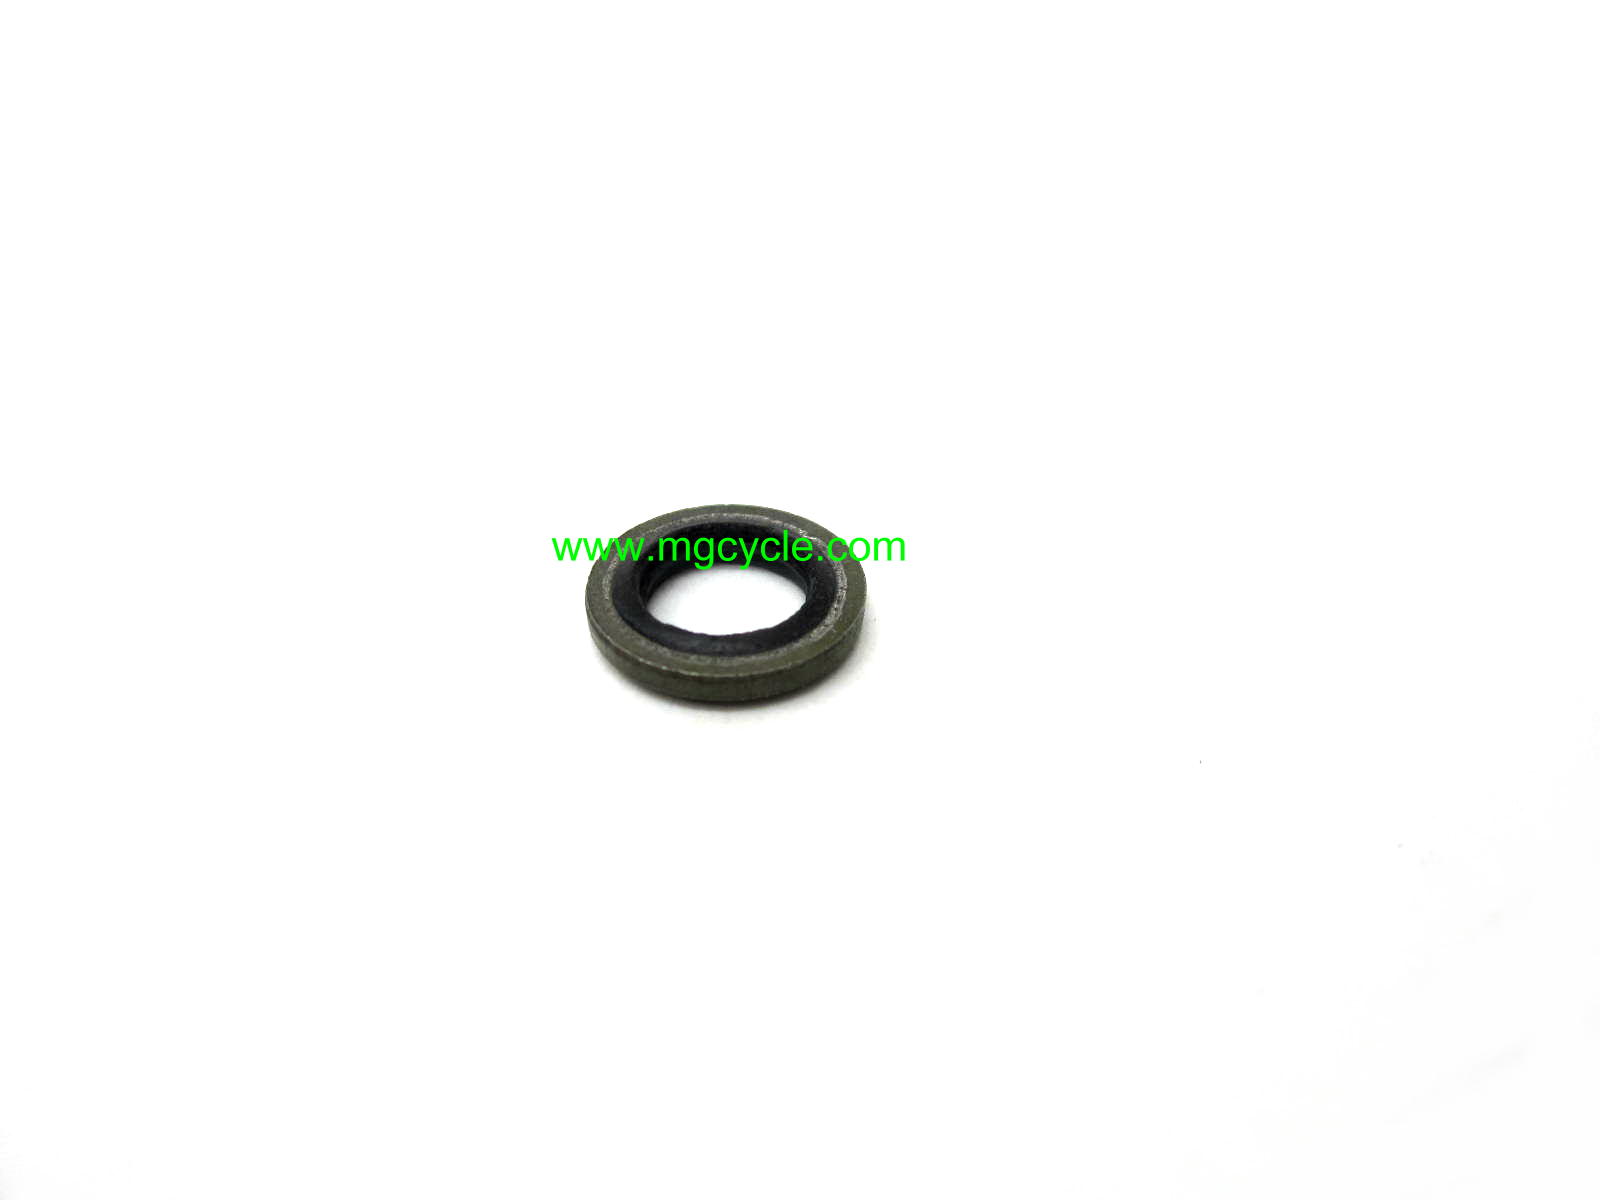 8mm seal washer with rubber center sub for GU12154200